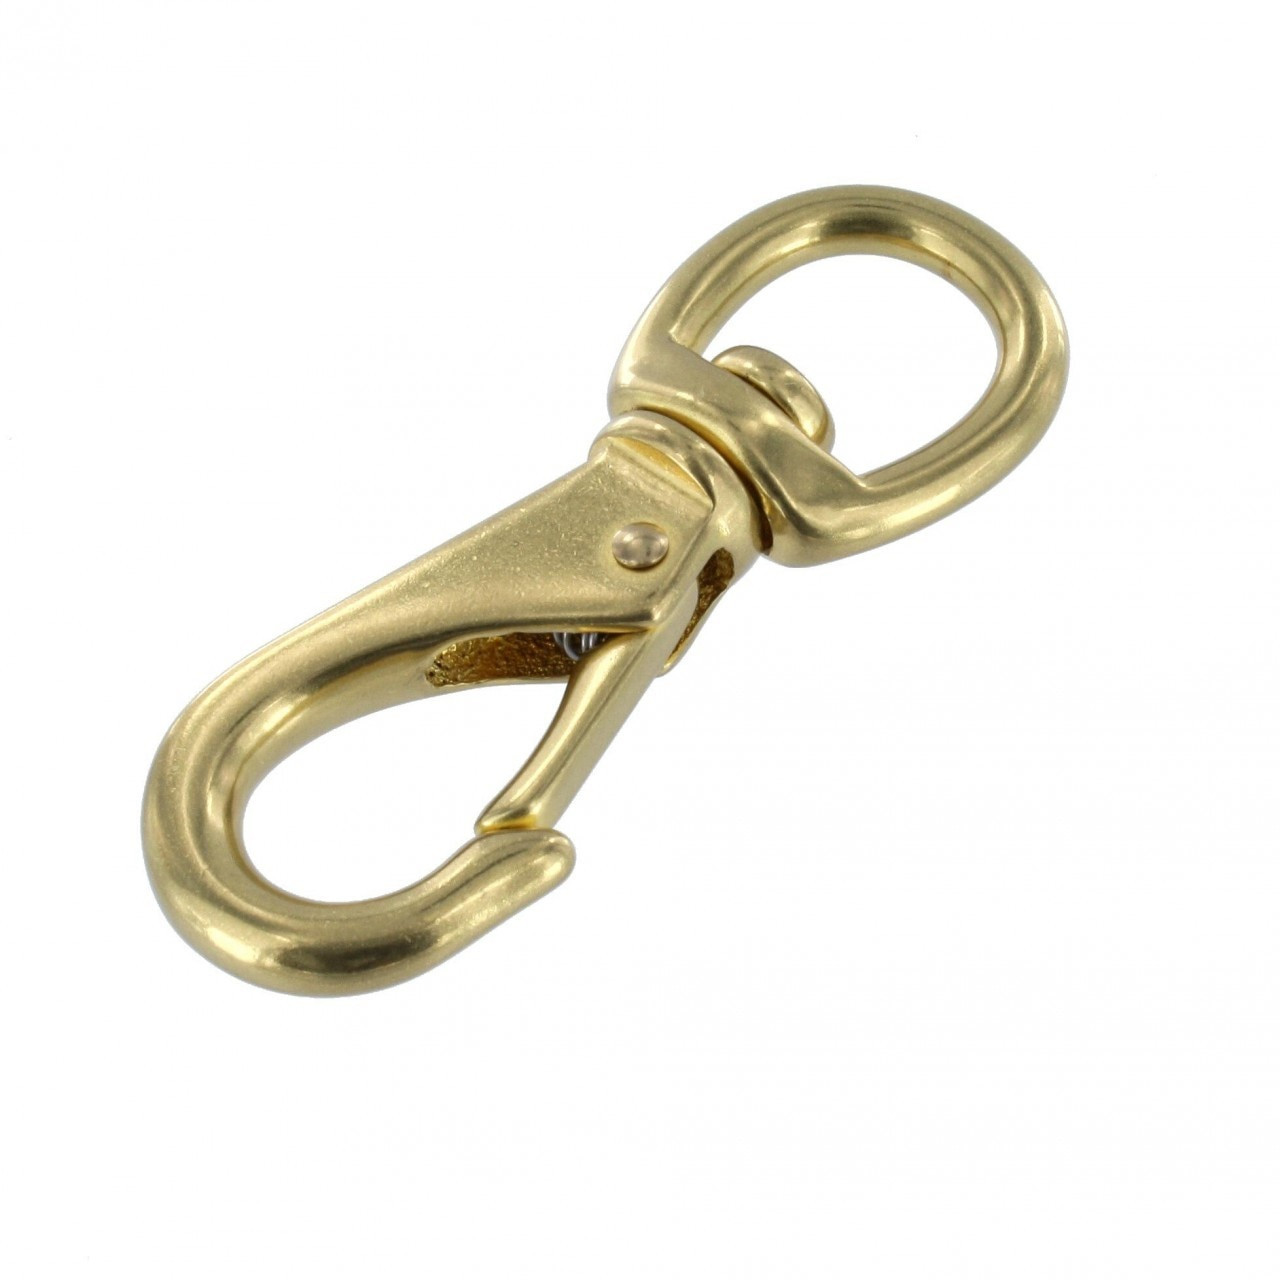 Brass Swivel Snap Hooks - Diverse and Multifuntional (1/4 Inch, 5 Pack)